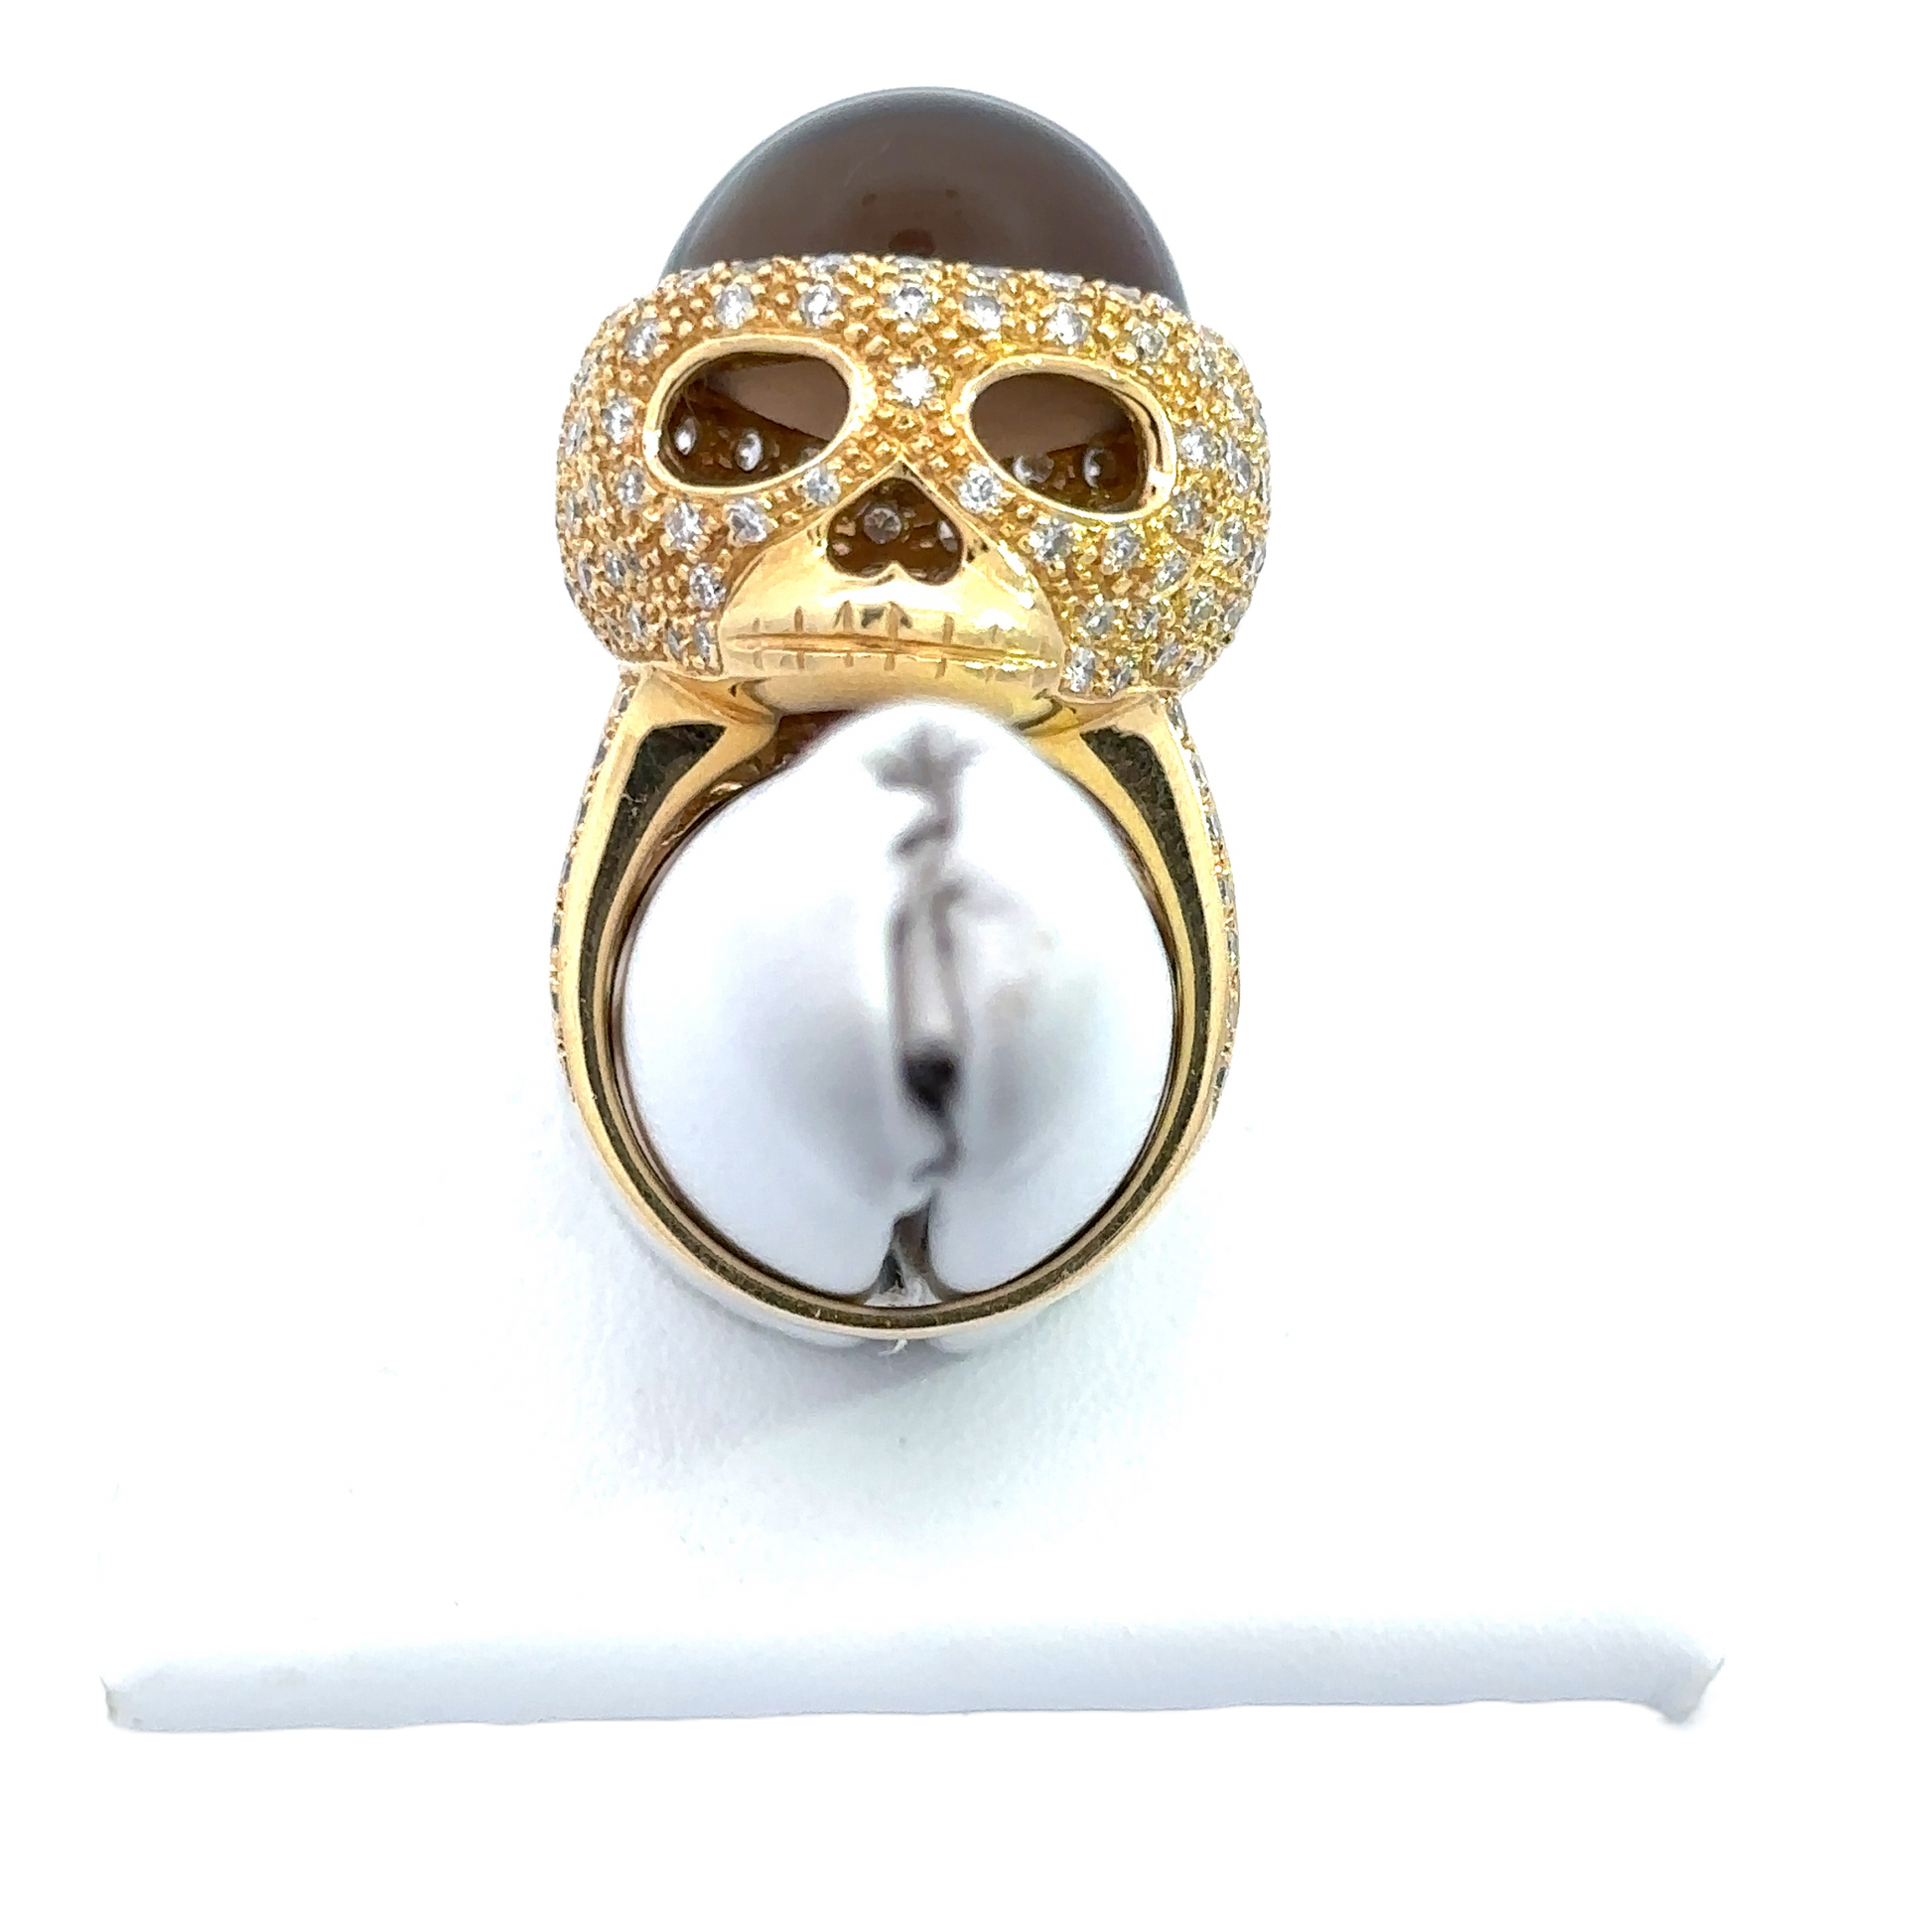 The skull ring on a ring stand to show what it would look like on the finger.